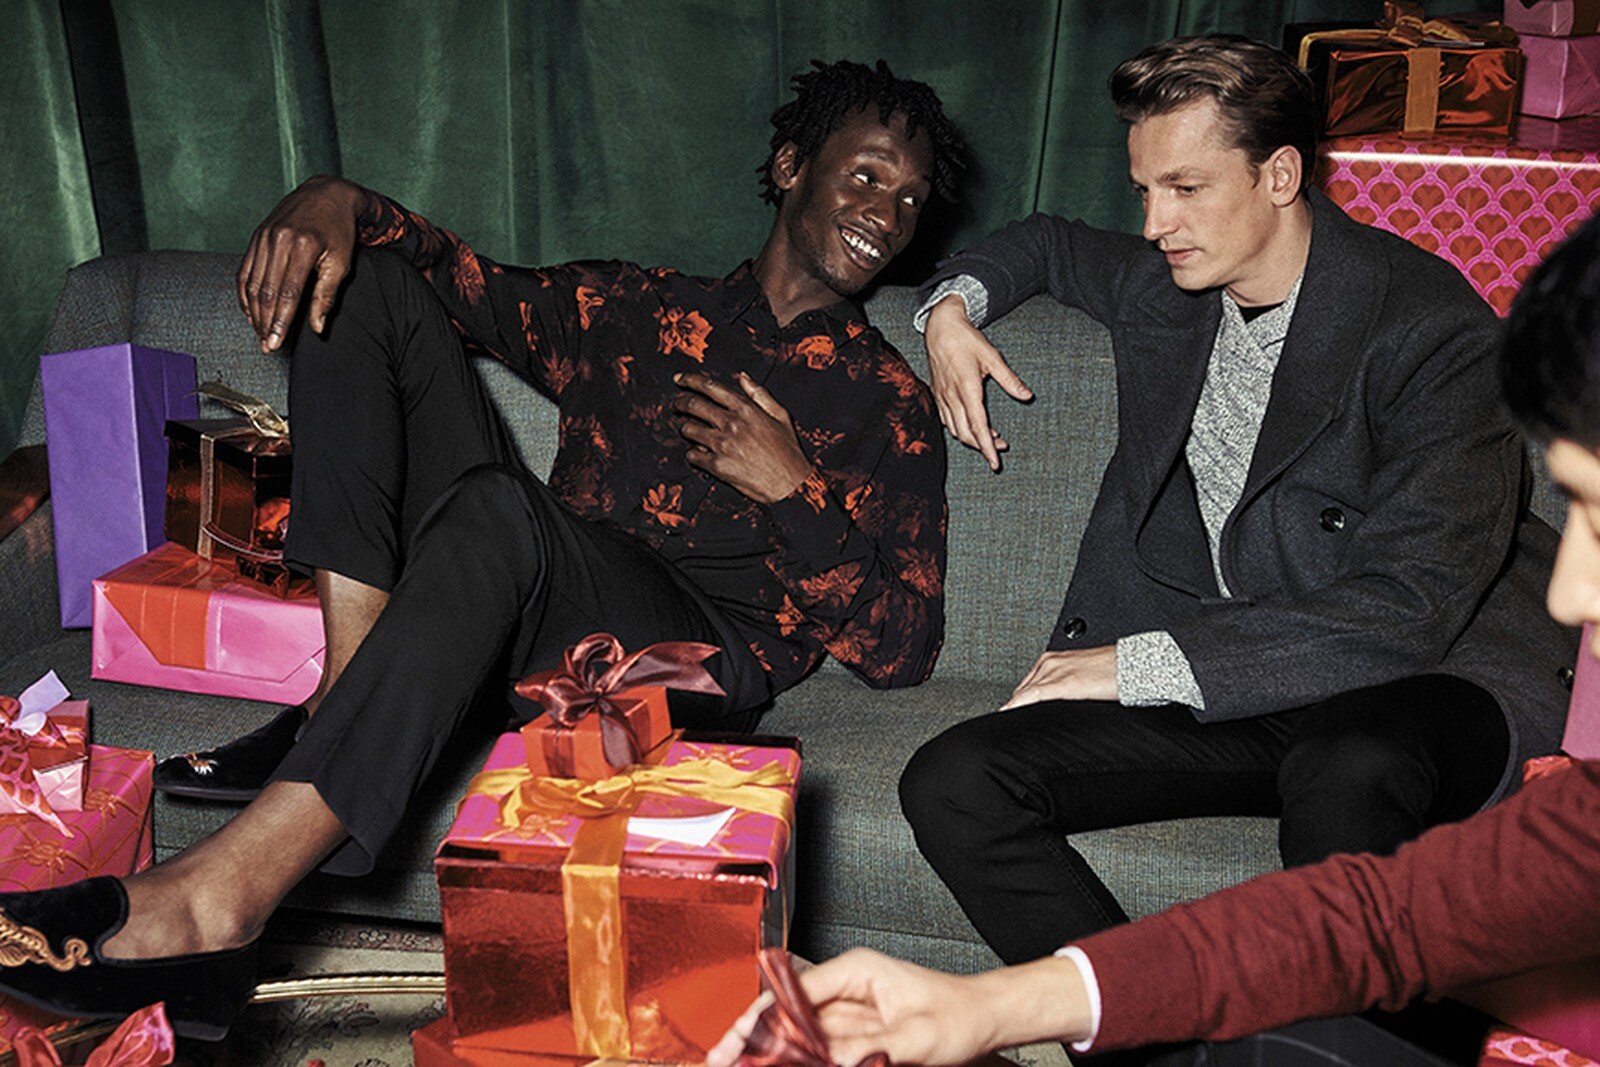 hm-holiday-2018-campaign-05.jpg